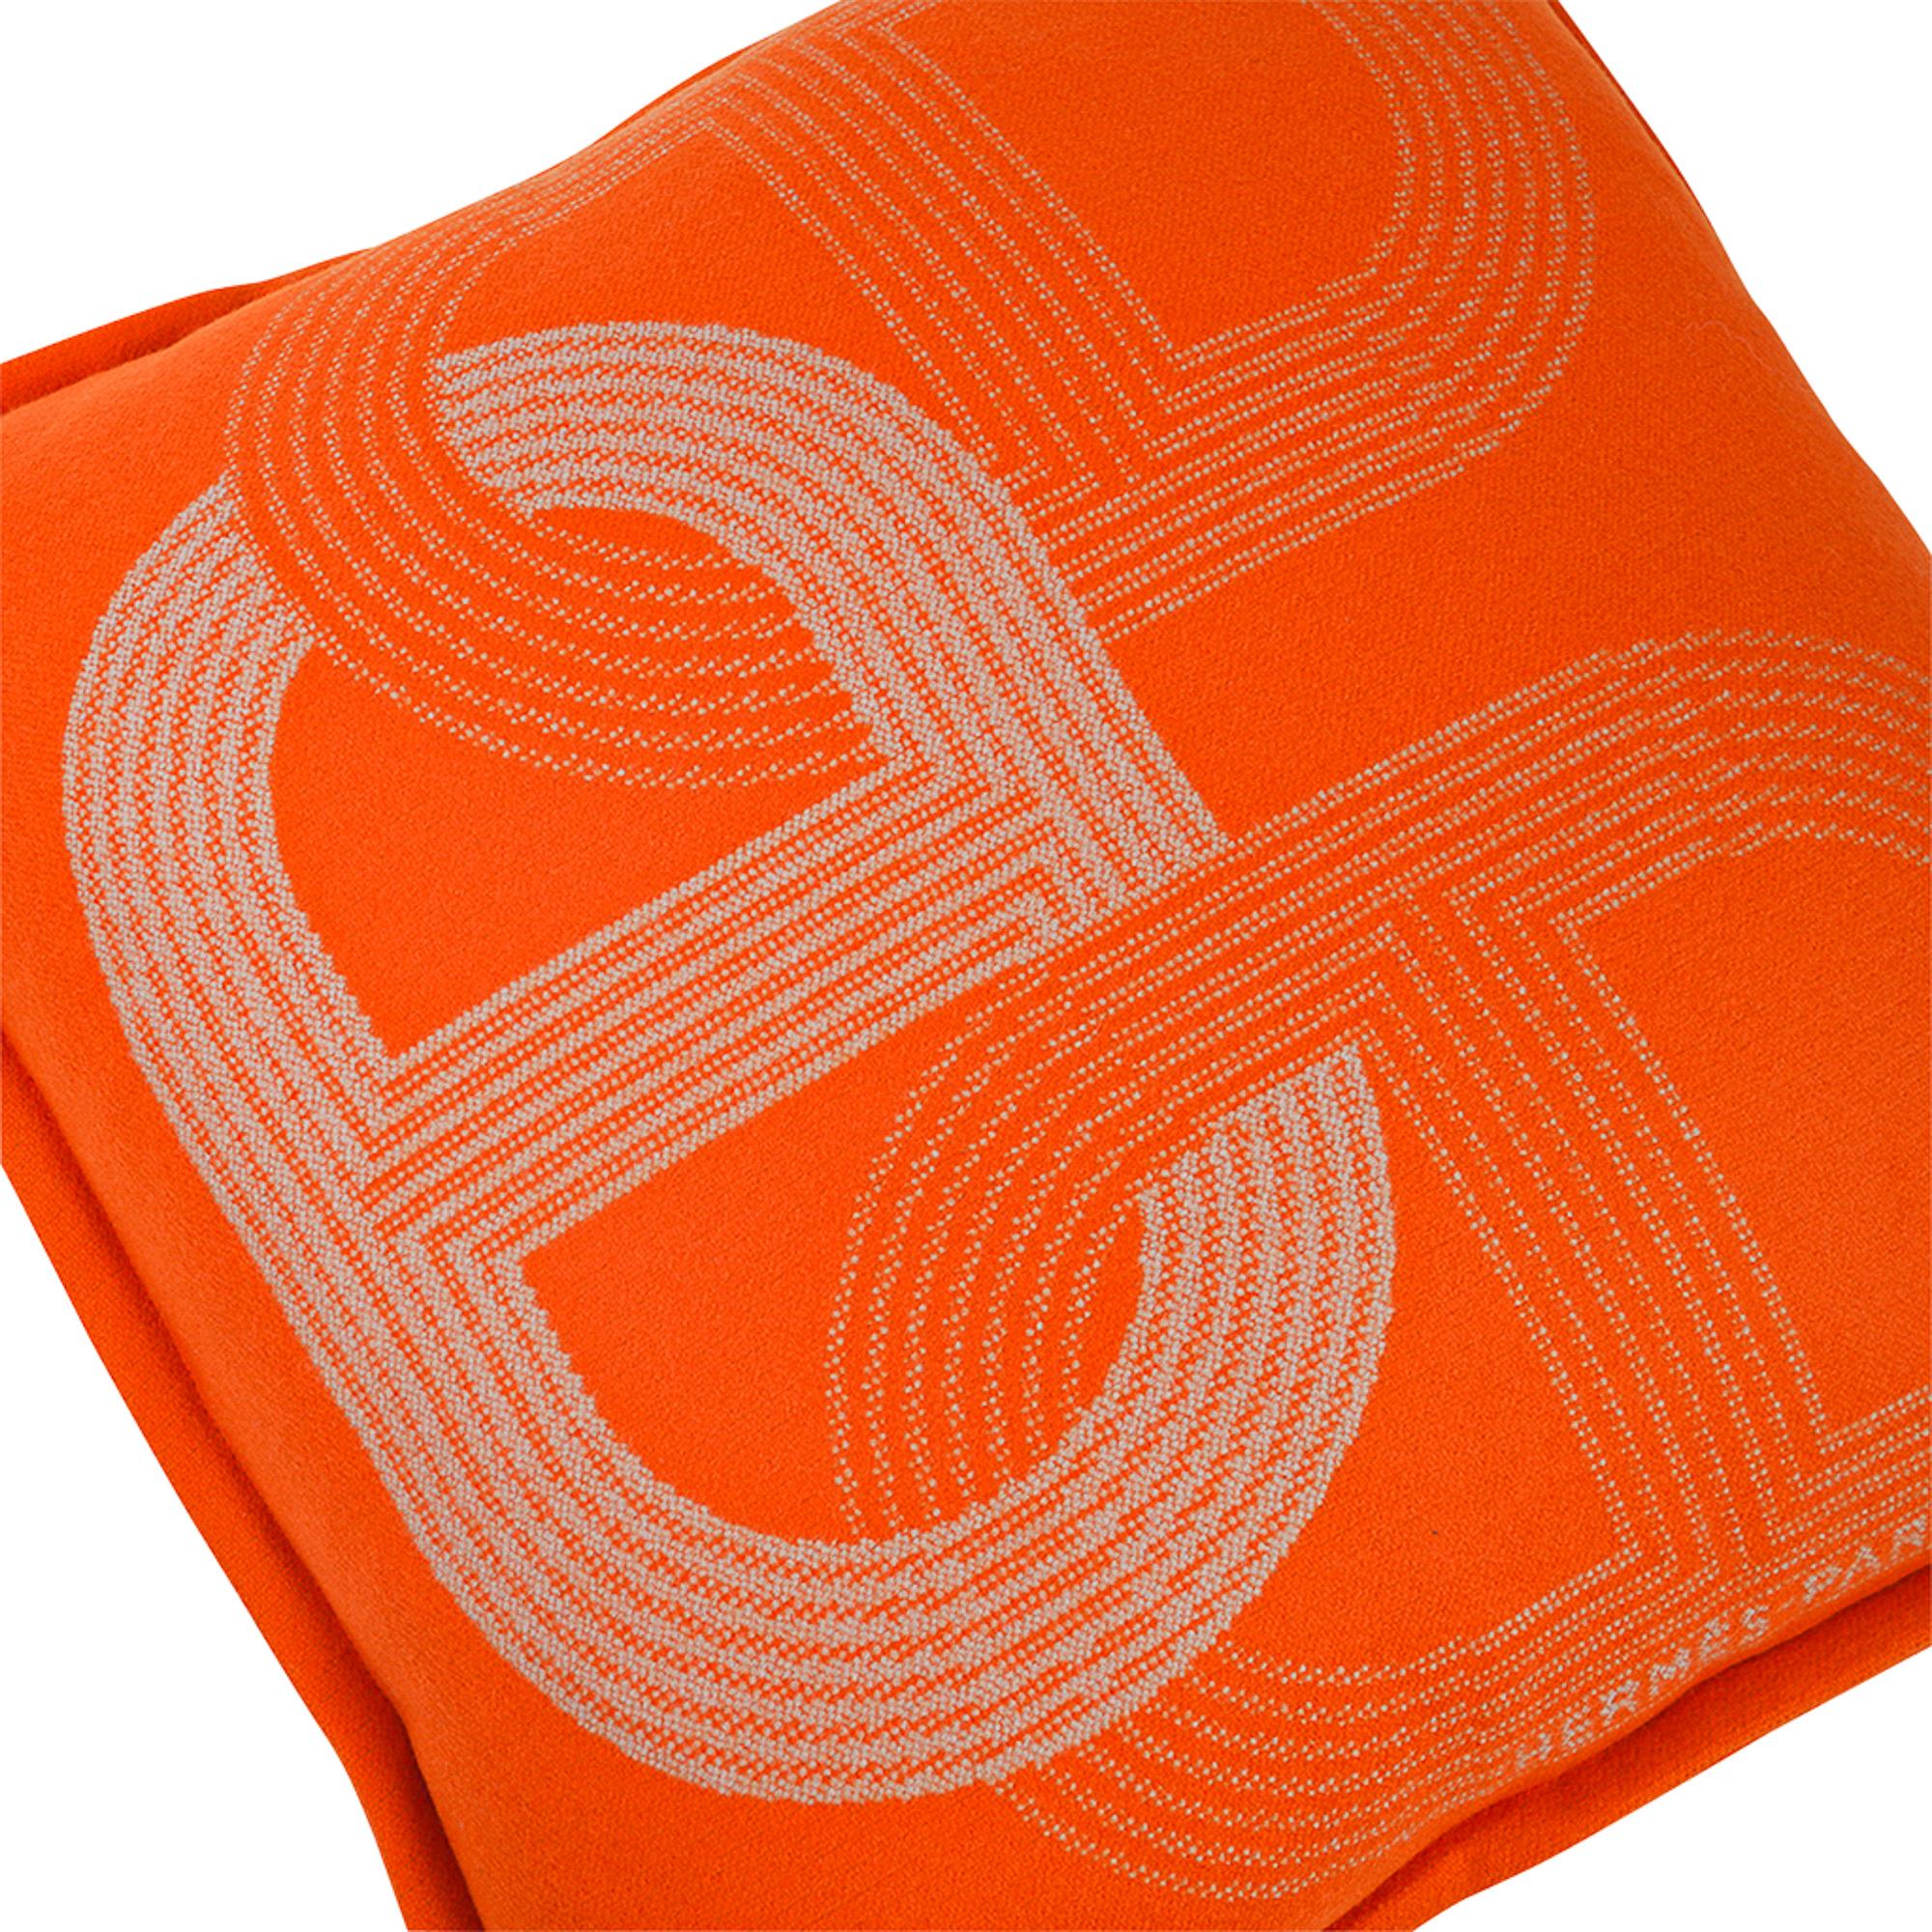 Mightychic offers an Hermes Circuit 24 Pillow featured in Orange colorway.
Created from 100% Merino Wool this fabulous blanket is a chic addition to any room.
Designed by Benoit-Pierre in 2012 this is a contemporary take on the emblem Chaine